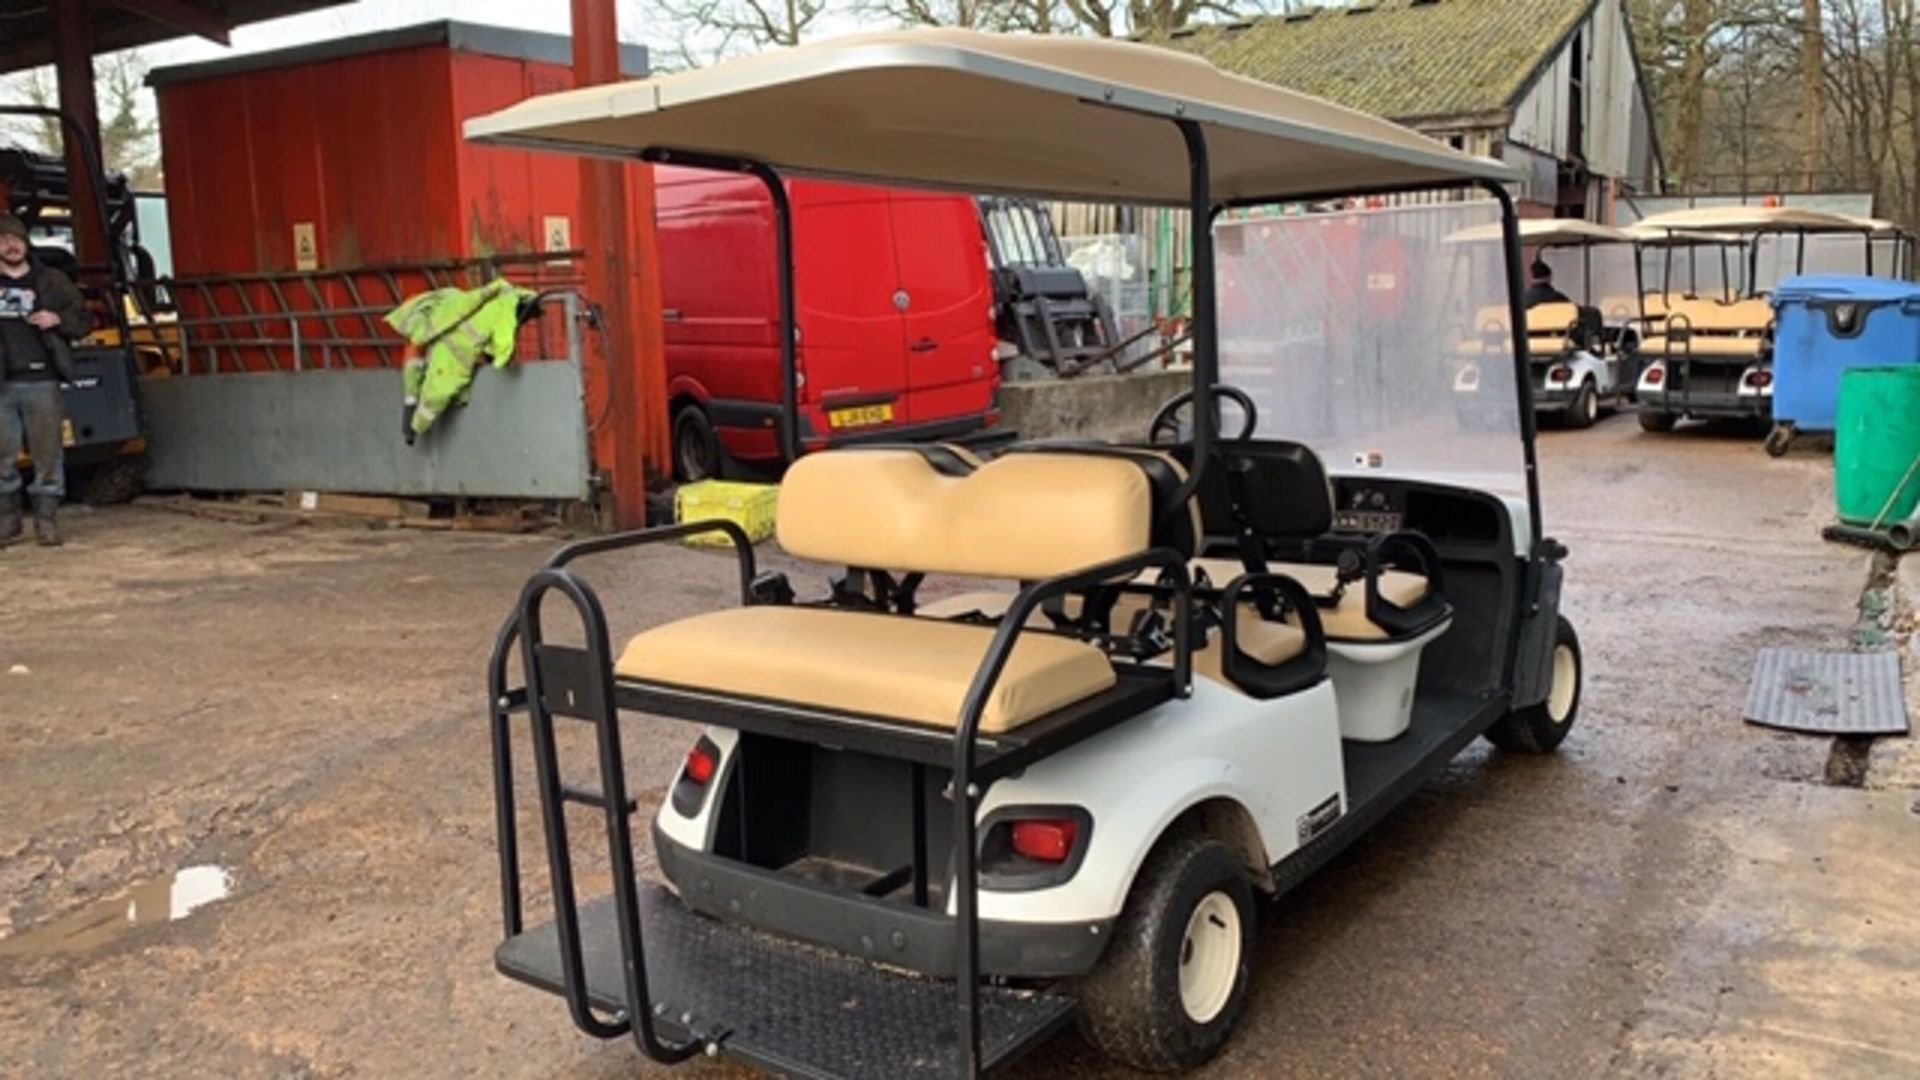 CUSHMAN EZGO SHUTTLE 6 PETROL ENGINED 6 SEATER GOLF / EVENTS BUGGY. YEAR 2017 BUILD. 234 REC HRS. - Image 5 of 5